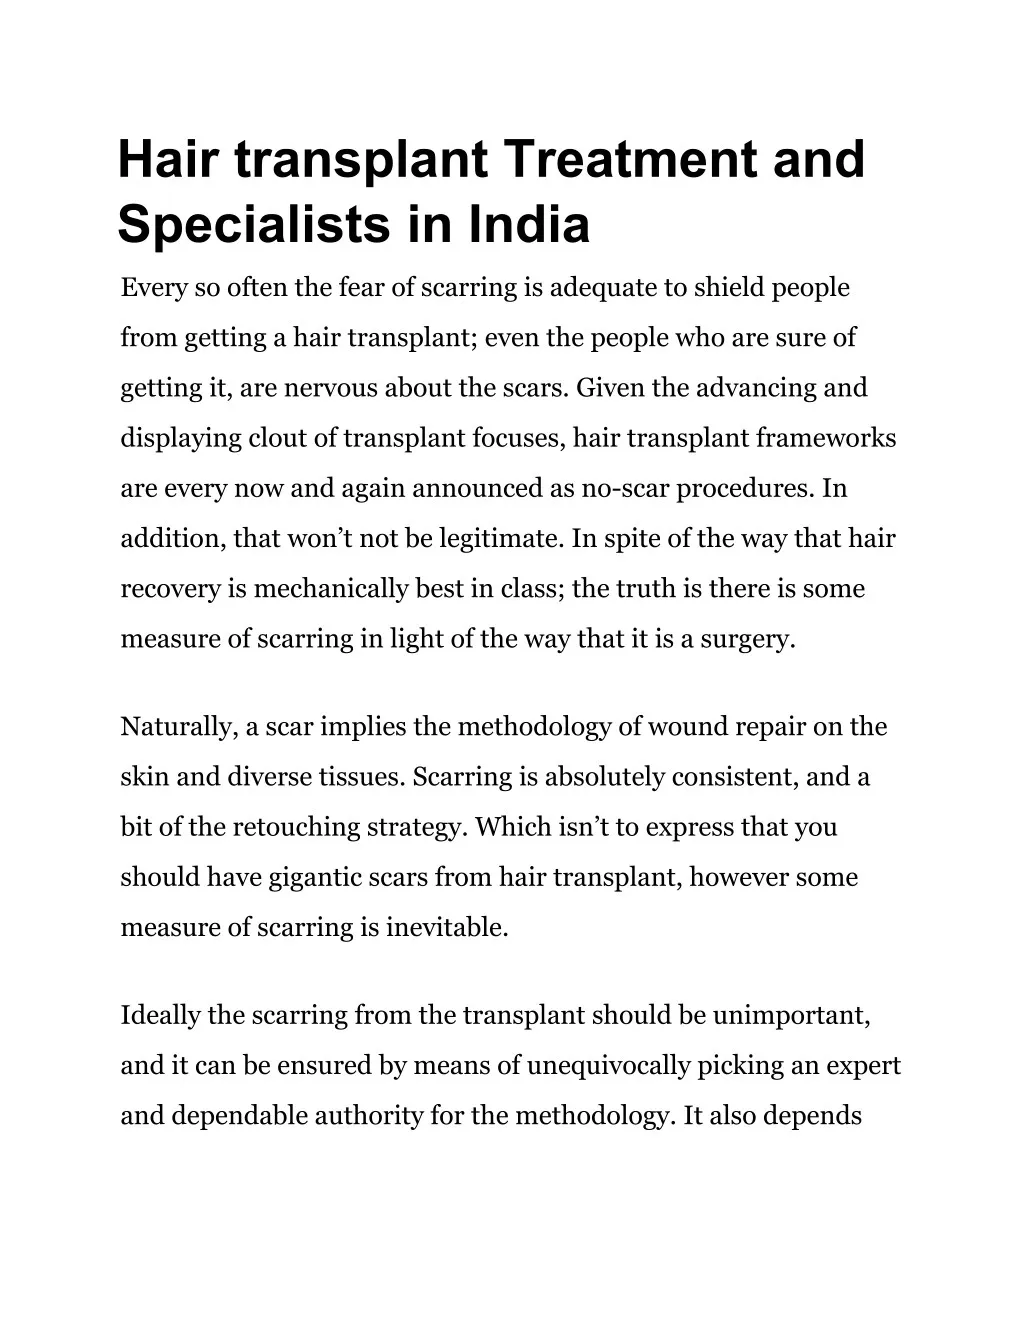 hair transplant treatment and specialists in india